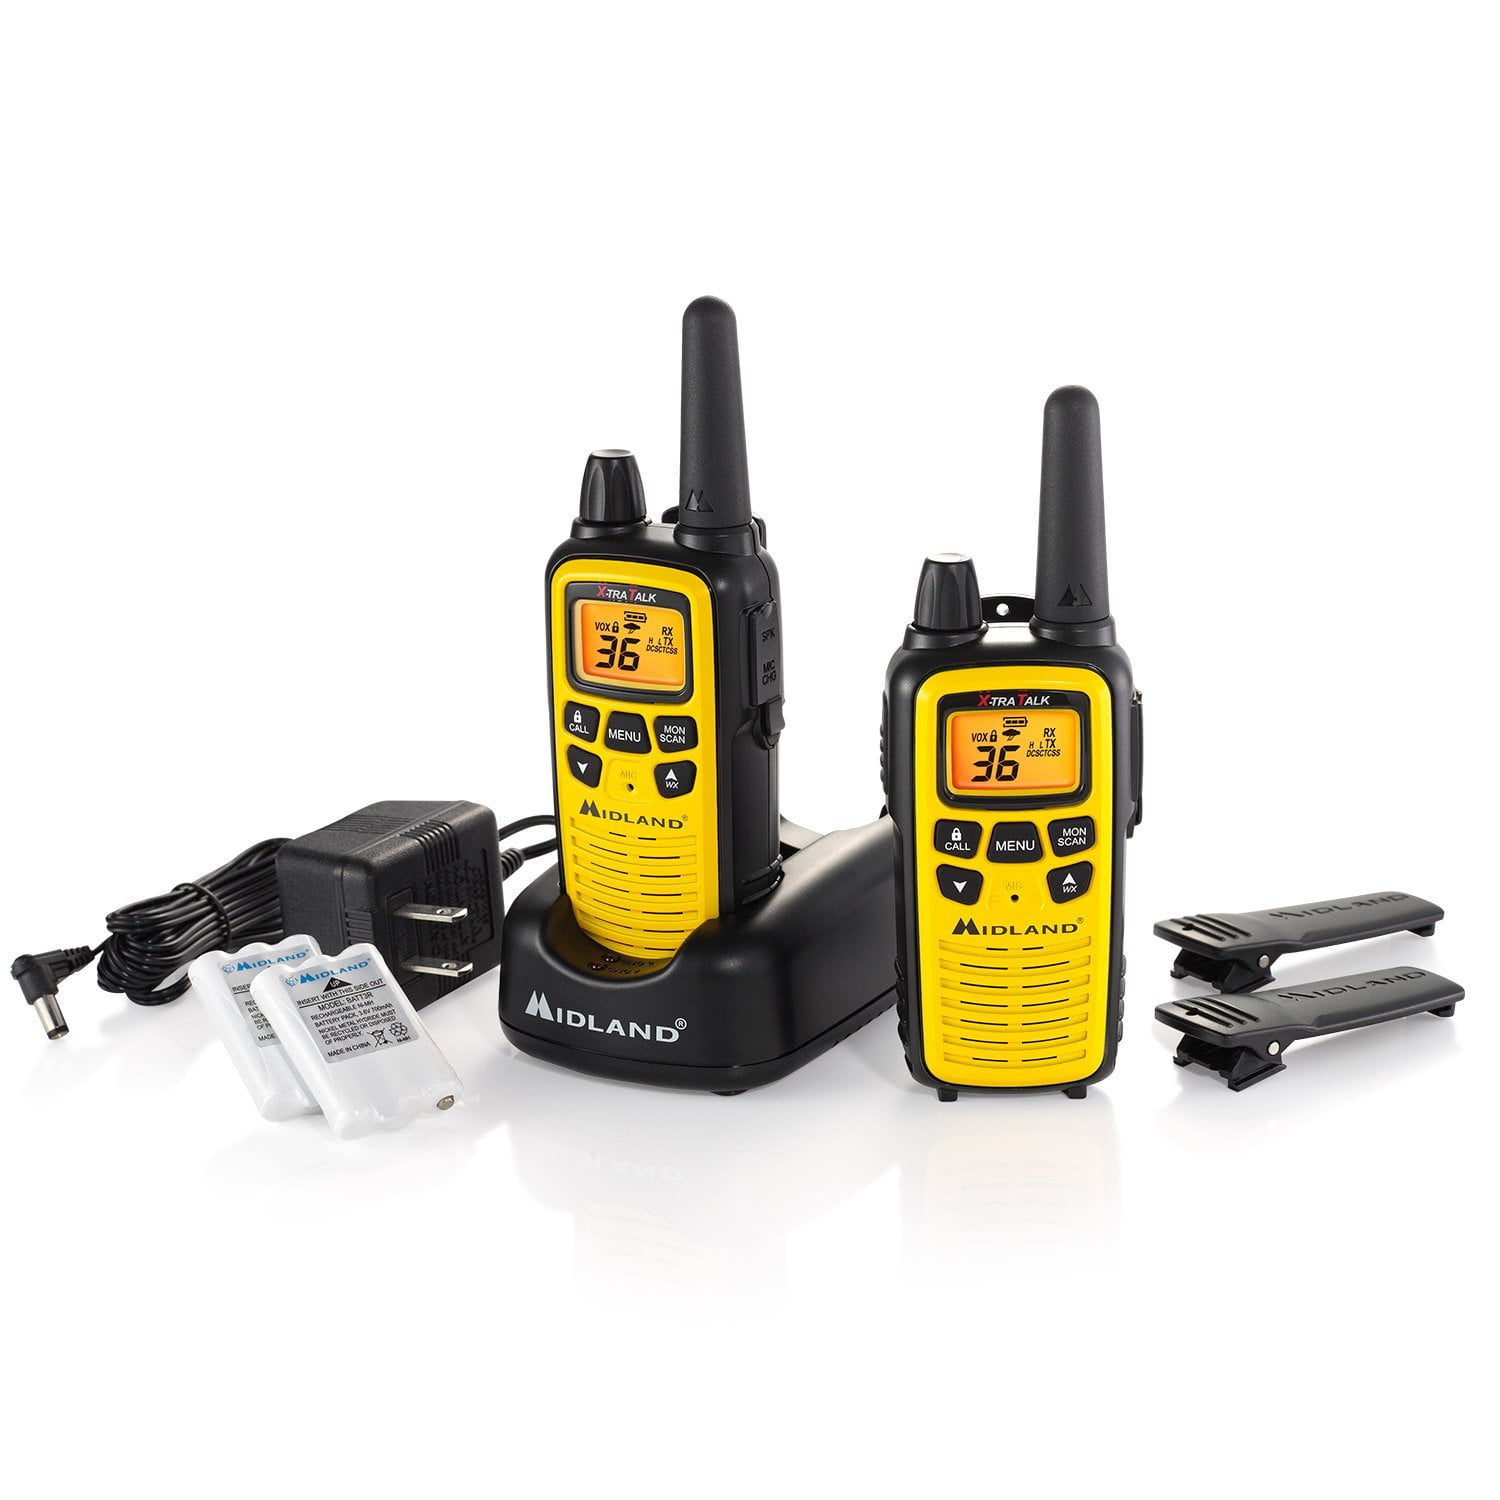 Midland LXT560VP3 36-Channel GMRS with NOAA Weather Alert and 26-Mile Range Midland Consumer Radio 